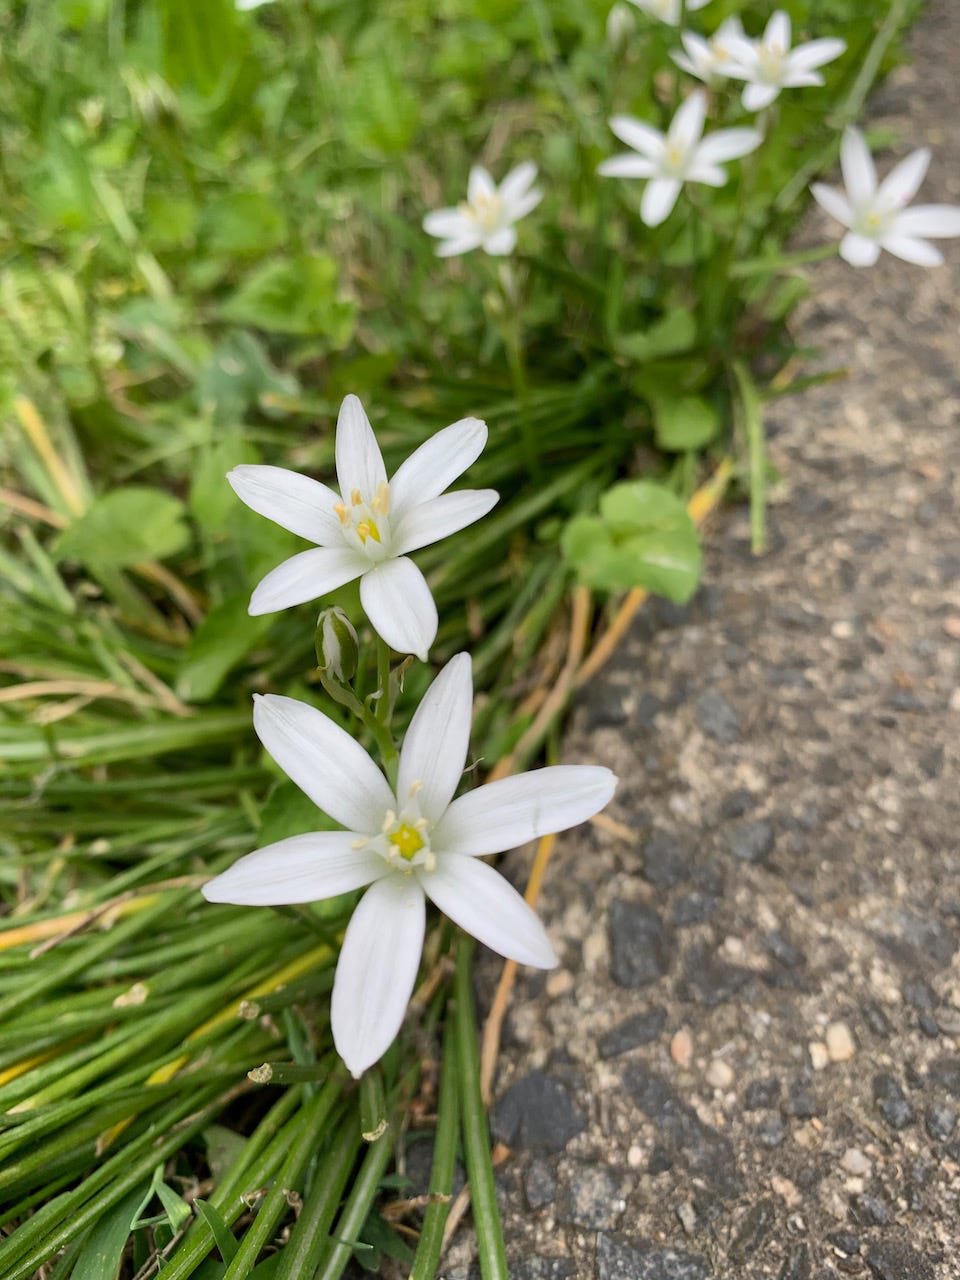 white flower with 6 petals growing between grass and the concrete sidewalk.